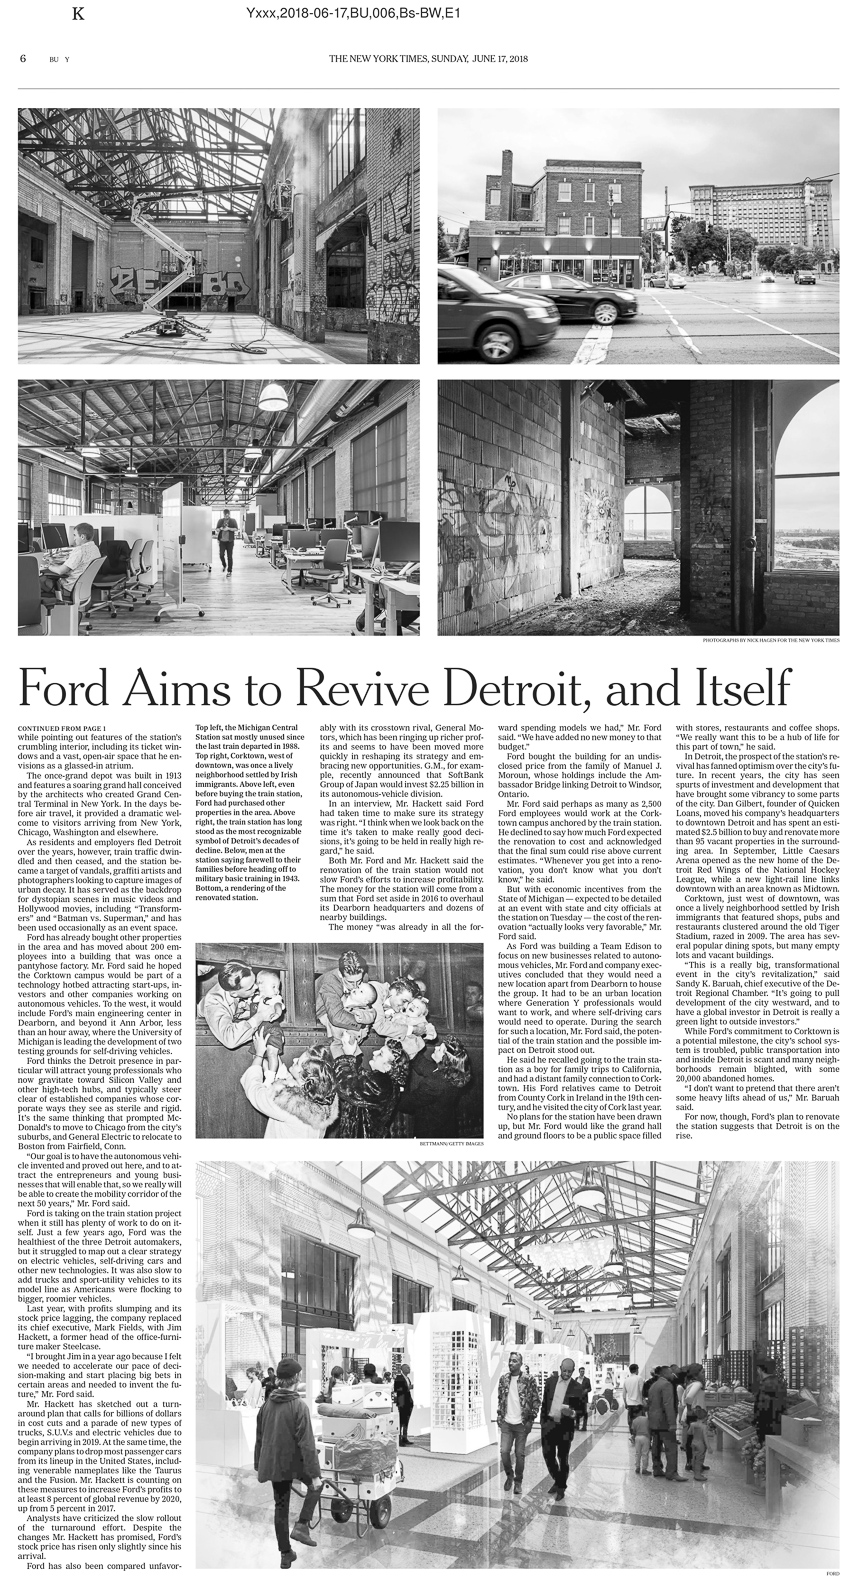 New York Times article on Detroit featuring photographs by Nick Hagen